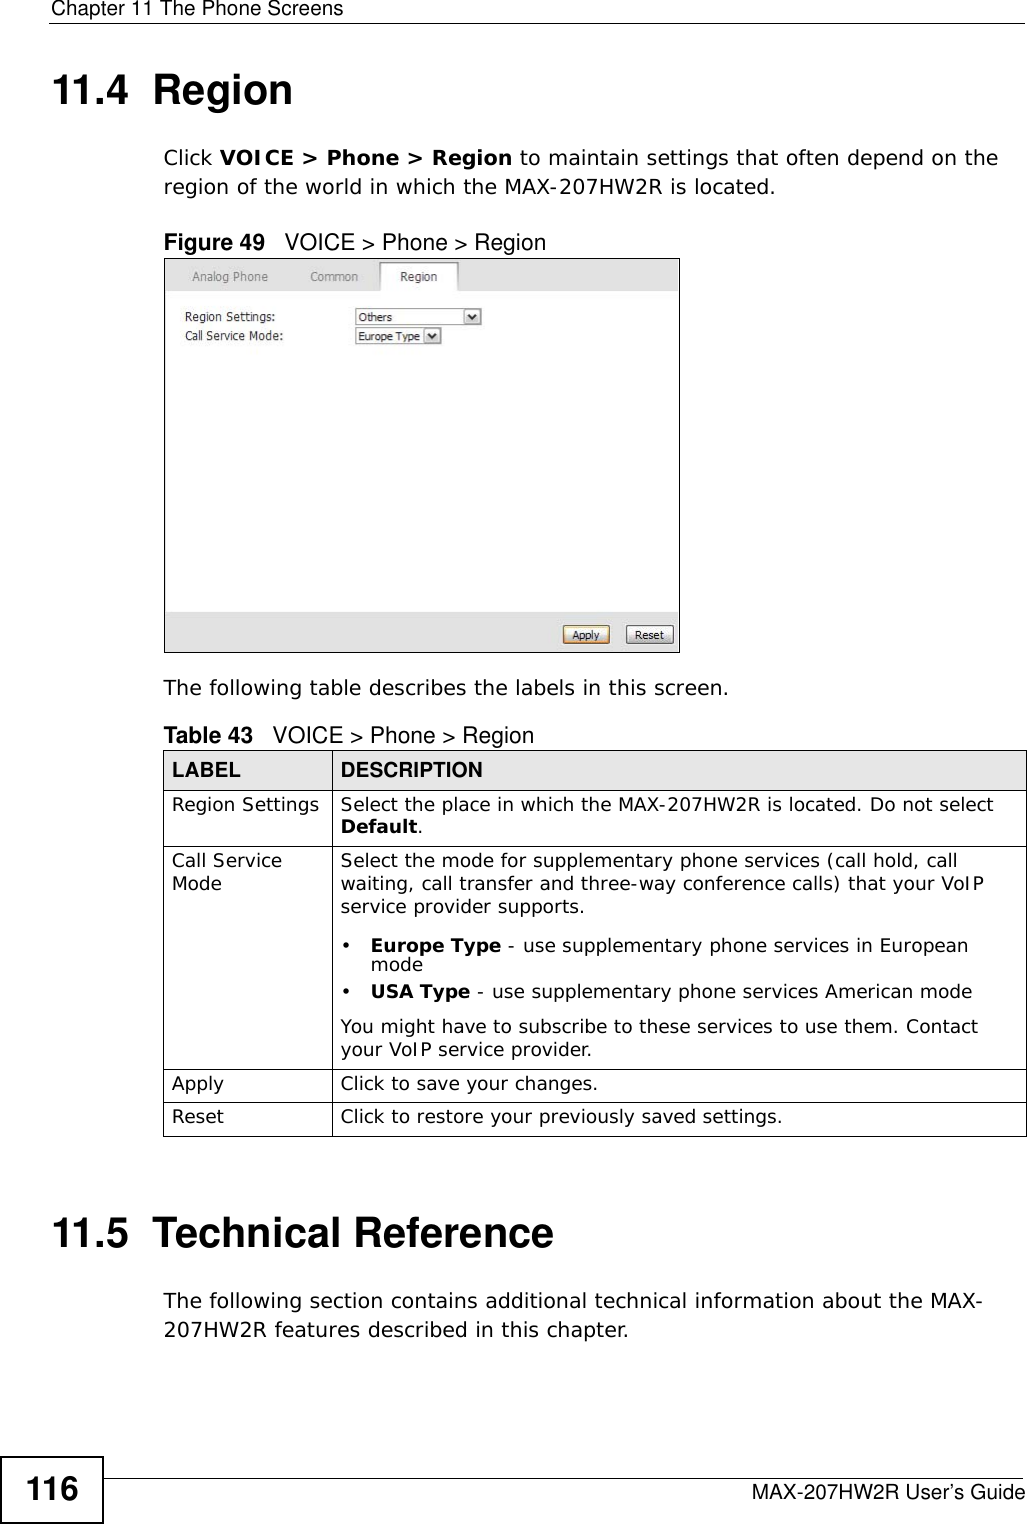 Chapter 11 The Phone ScreensMAX-207HW2R User’s Guide11611.4  RegionClick VOICE &gt; Phone &gt; Region to maintain settings that often depend on the region of the world in which the MAX-207HW2R is located.Figure 49   VOICE &gt; Phone &gt; RegionThe following table describes the labels in this screen.11.5  Technical ReferenceThe following section contains additional technical information about the MAX-207HW2R features described in this chapter.Table 43   VOICE &gt; Phone &gt; RegionLABEL DESCRIPTIONRegion Settings Select the place in which the MAX-207HW2R is located. Do not select Default.Call Service Mode Select the mode for supplementary phone services (call hold, call waiting, call transfer and three-way conference calls) that your VoIP service provider supports.•Europe Type - use supplementary phone services in European mode•USA Type - use supplementary phone services American modeYou might have to subscribe to these services to use them. Contact your VoIP service provider.Apply Click to save your changes.Reset Click to restore your previously saved settings.